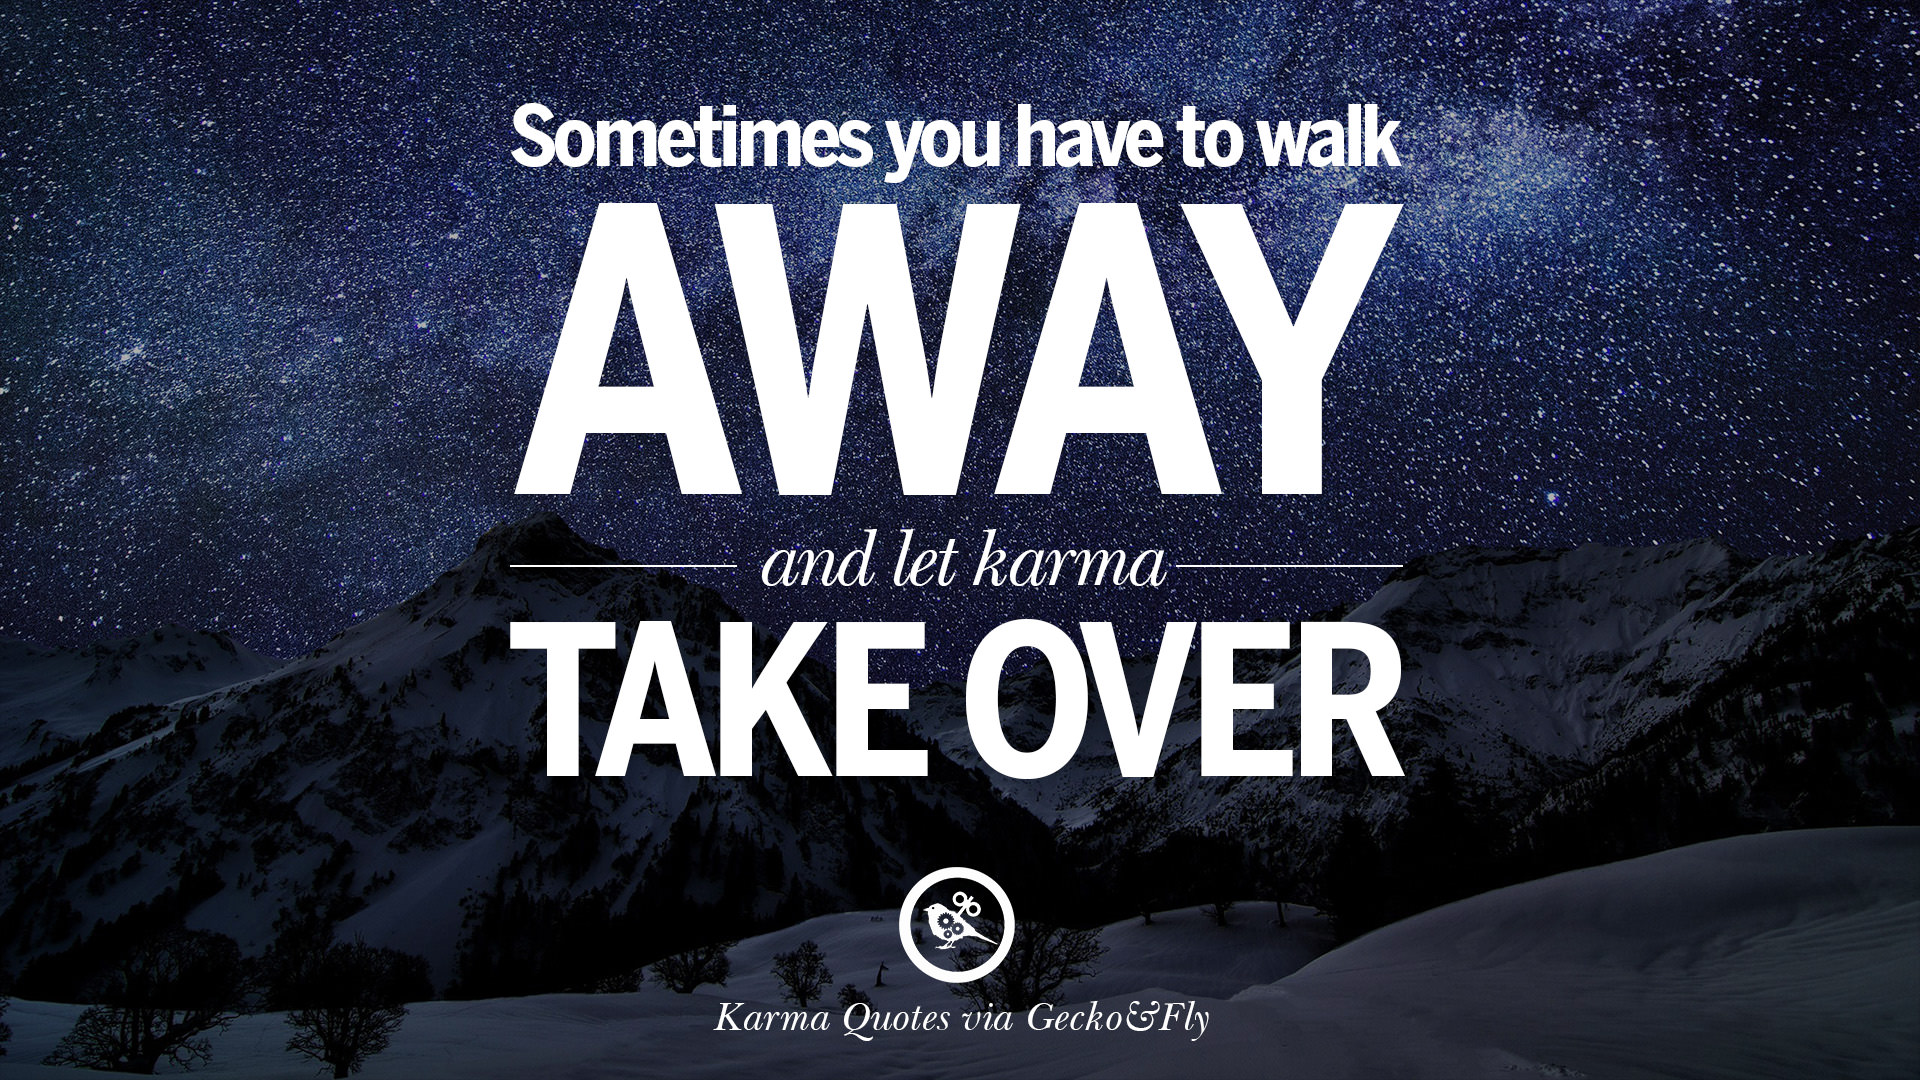 18 Good Karma Quotes on Relationship Revenge and Life